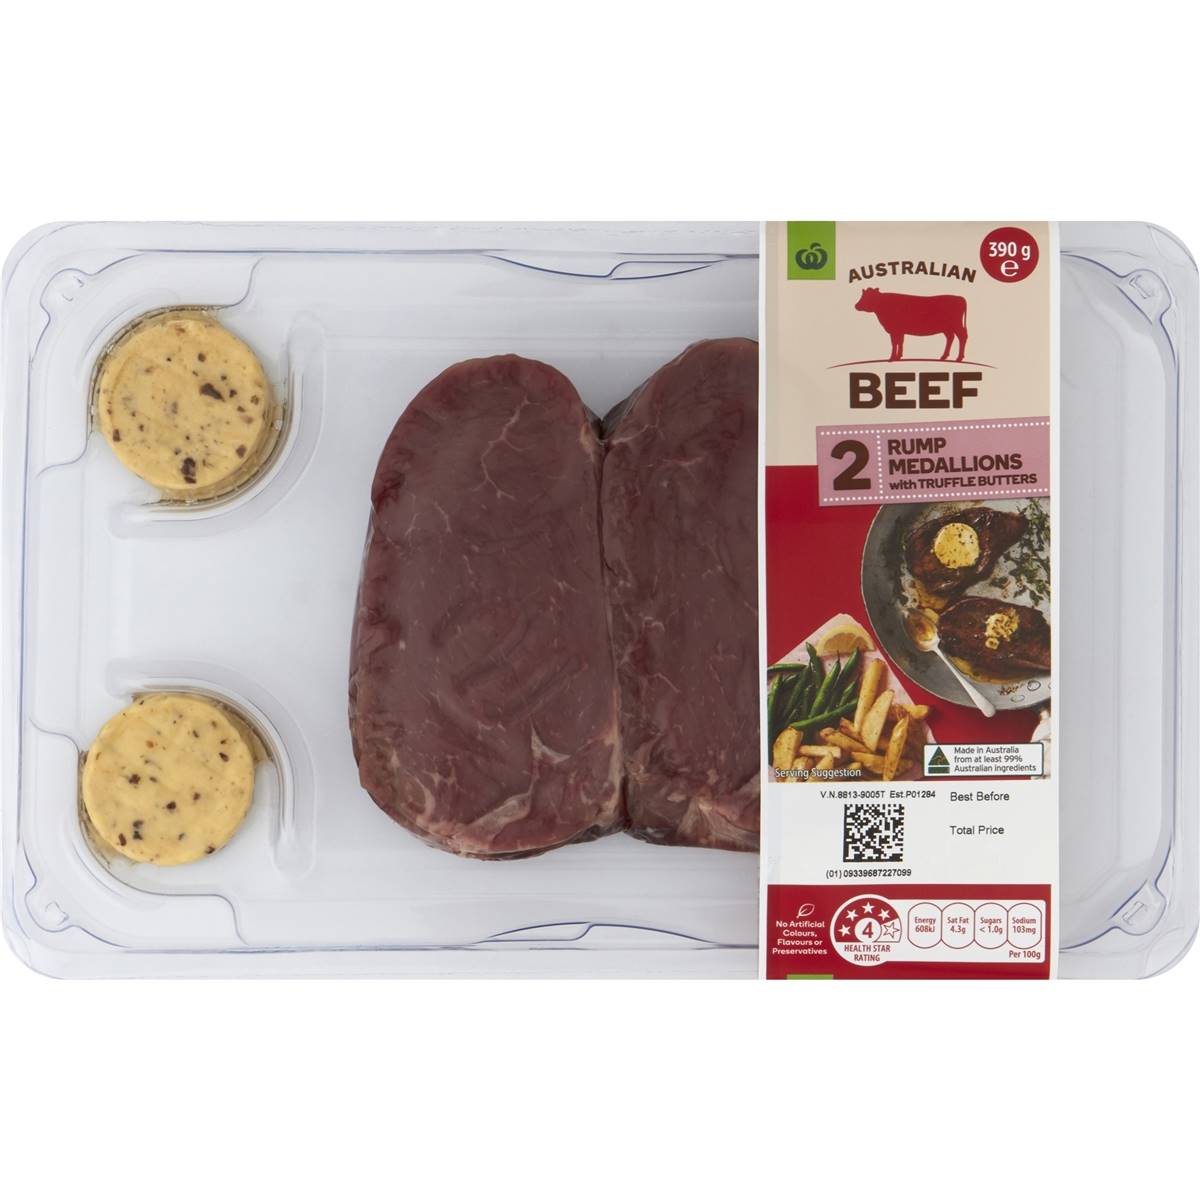 Calories in Woolworths Beef Rump Medallions With Truffle Butter